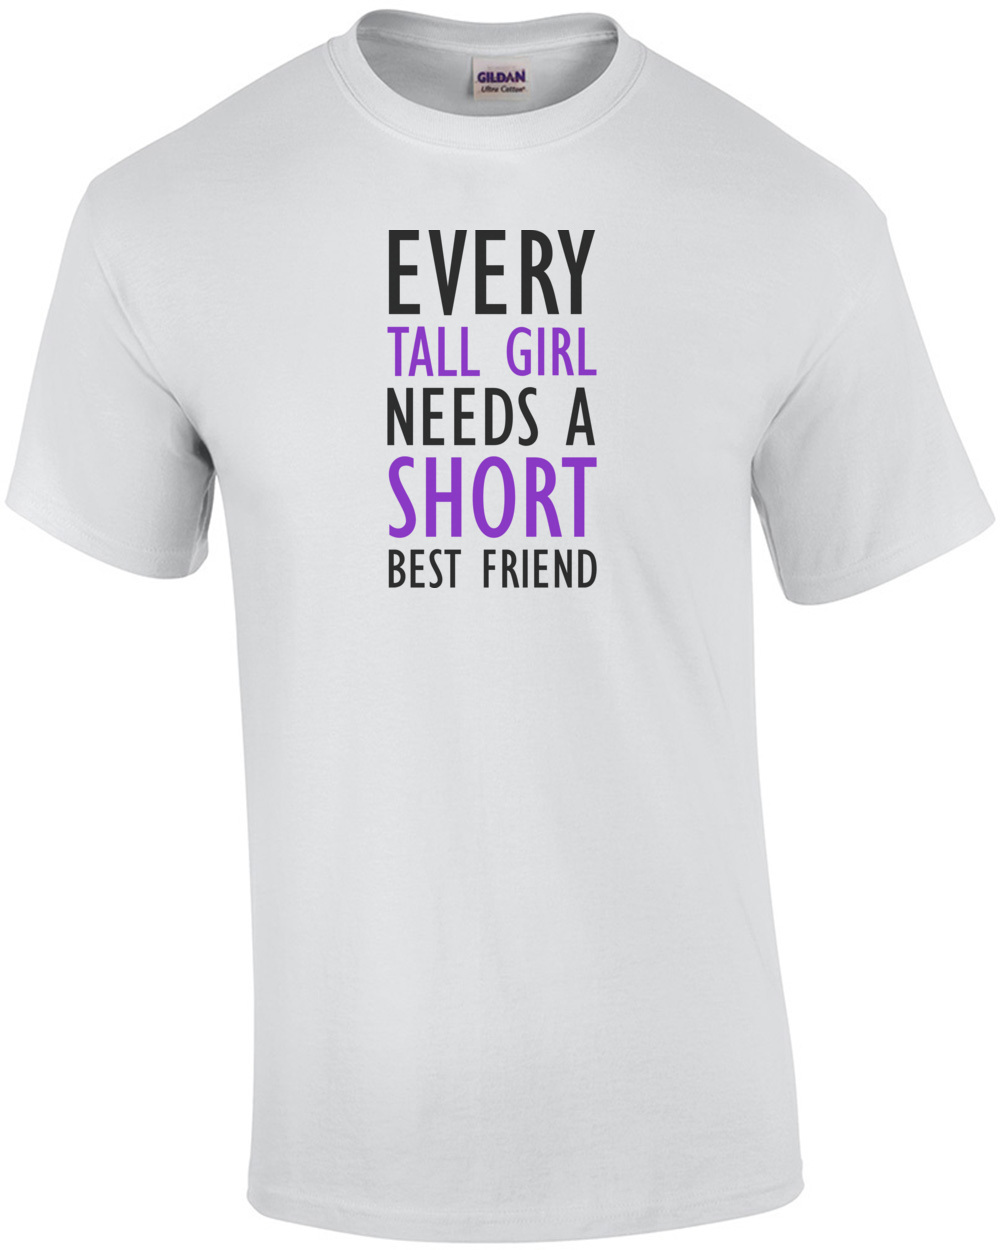 Every girl needs a shirt best - funny ladies t-shirt | eBay